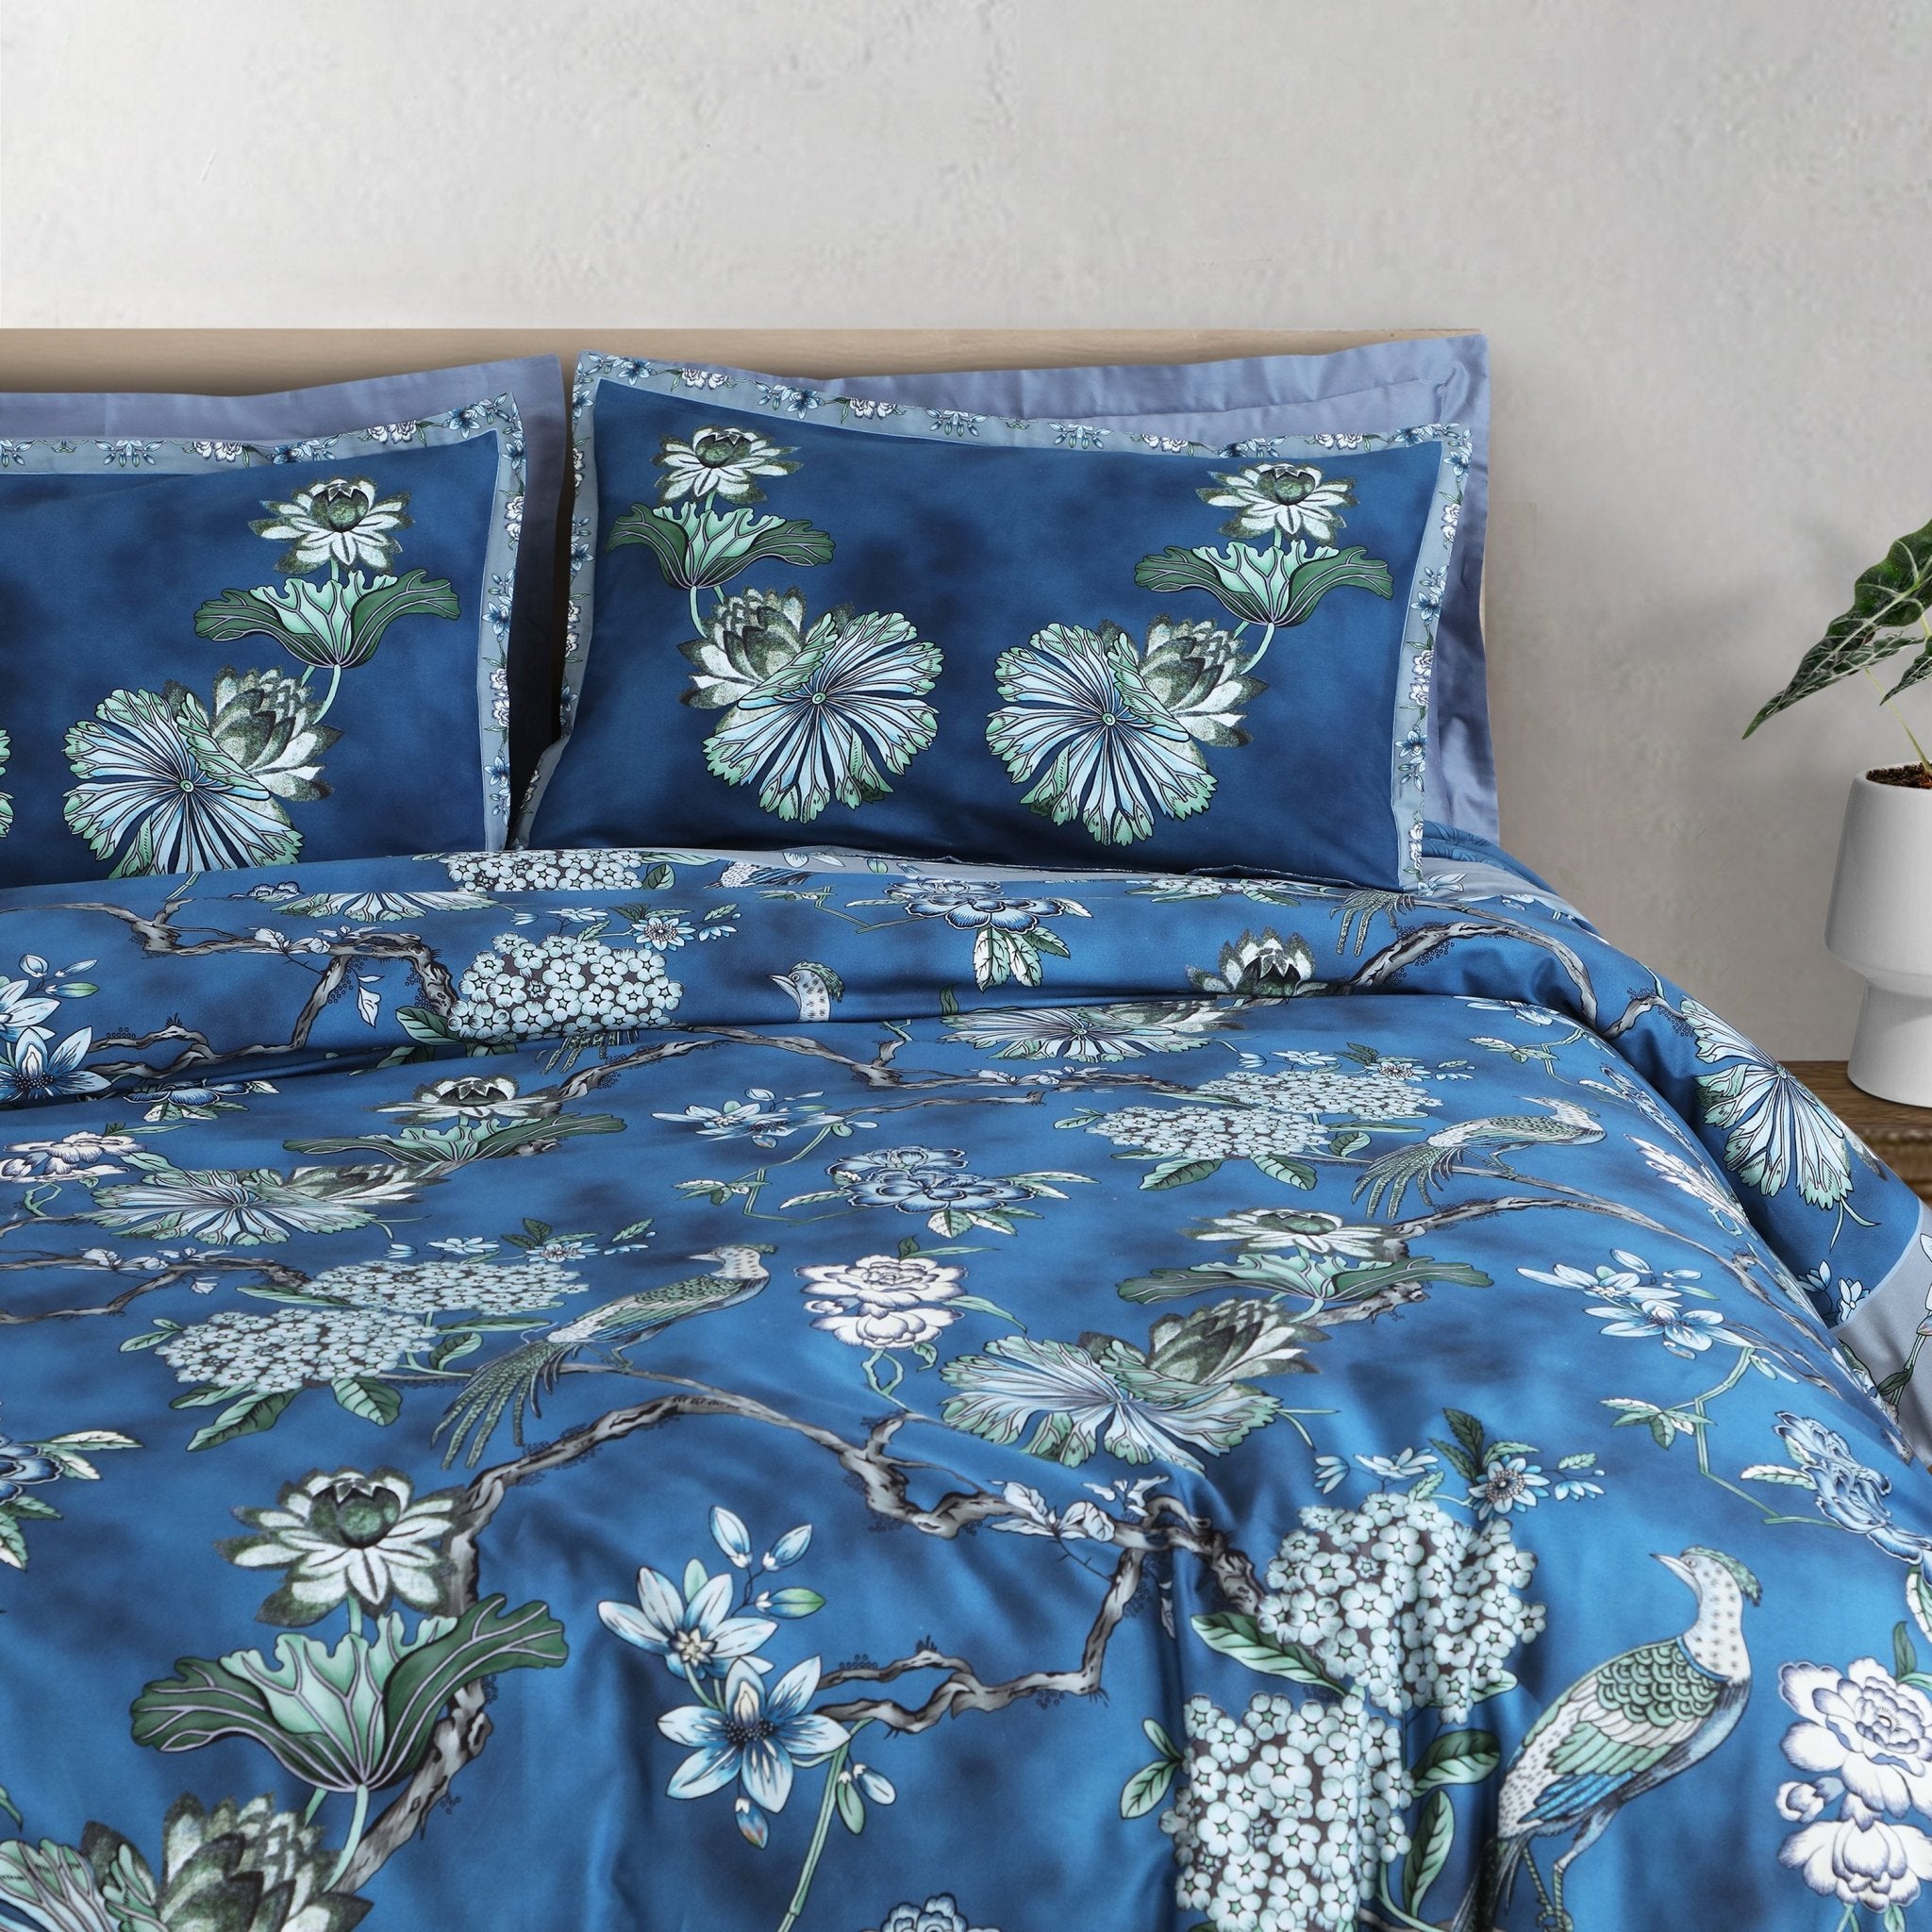 100% Cotton 350TC Blue Ethnic Sion Bedding Collection - MALAKO